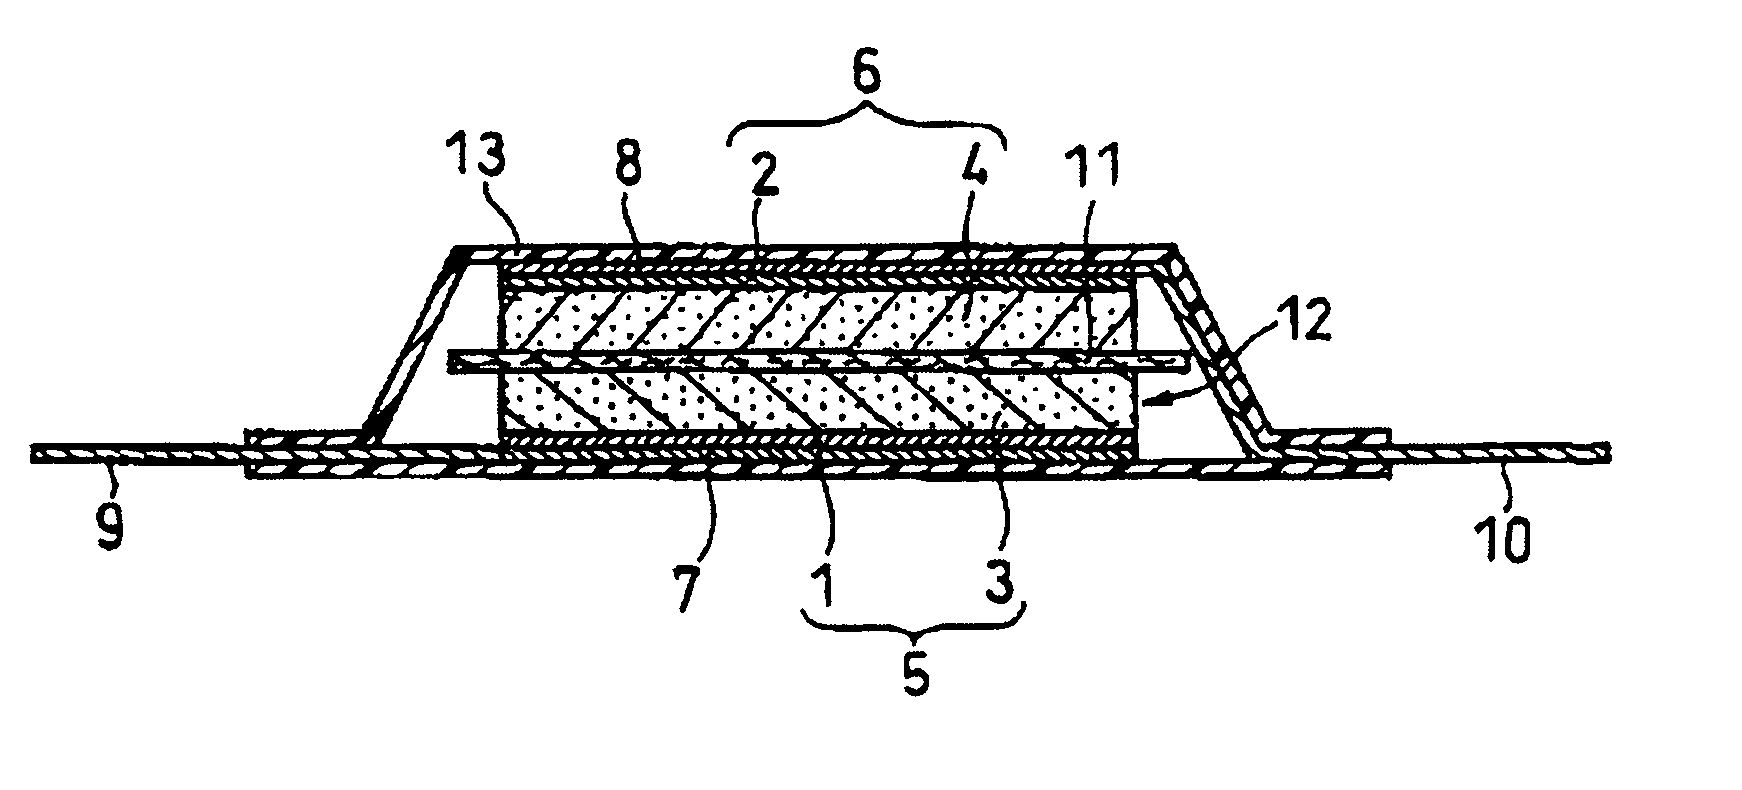 Nonaqueous electrolyte for electrochemical devices